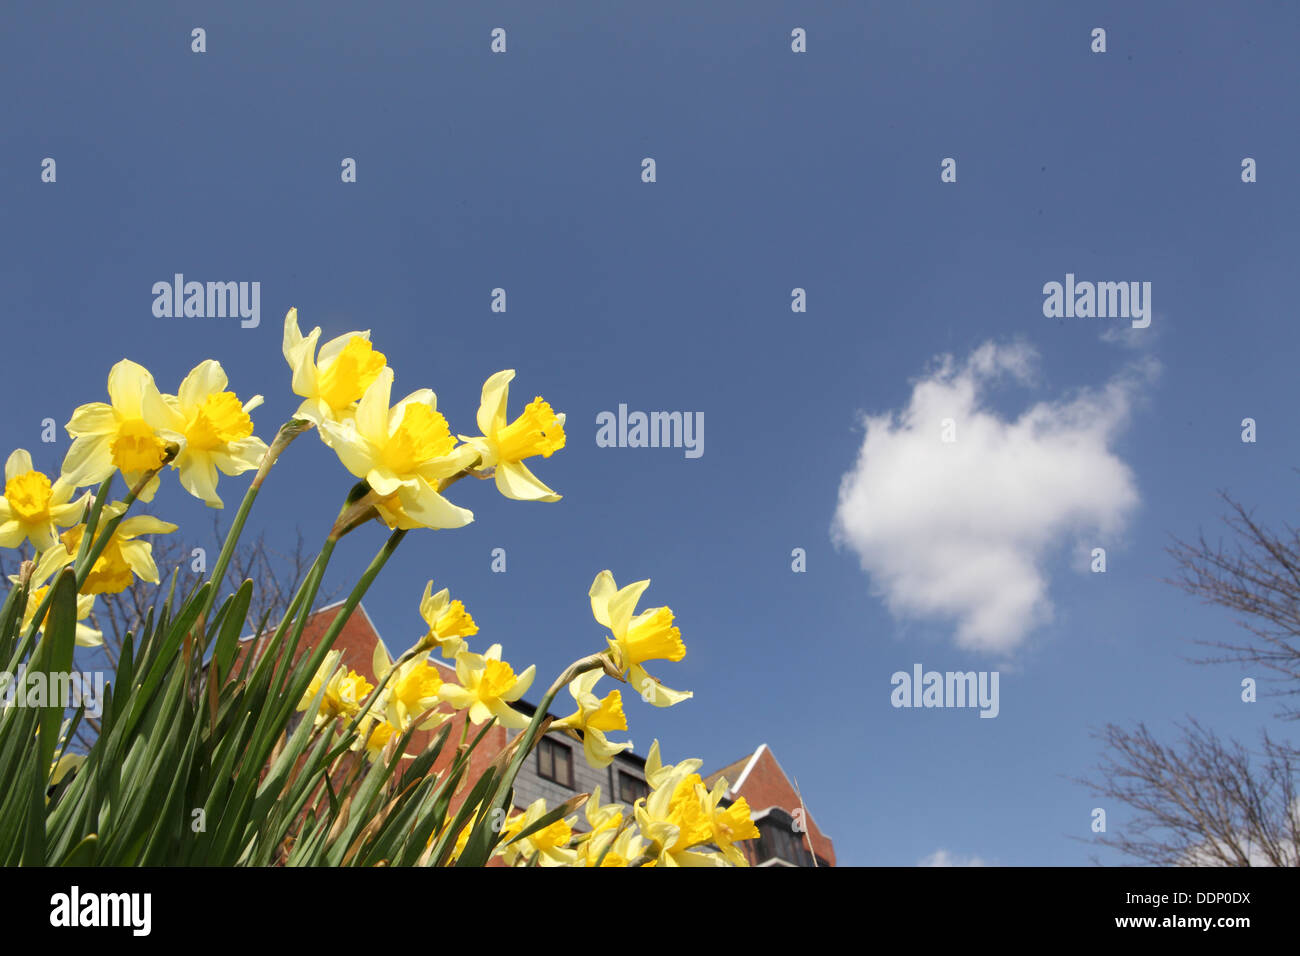 Daffodils blue sky and fluffy white cloud, Spring Springtime, Suffolk, UK Stock Photo